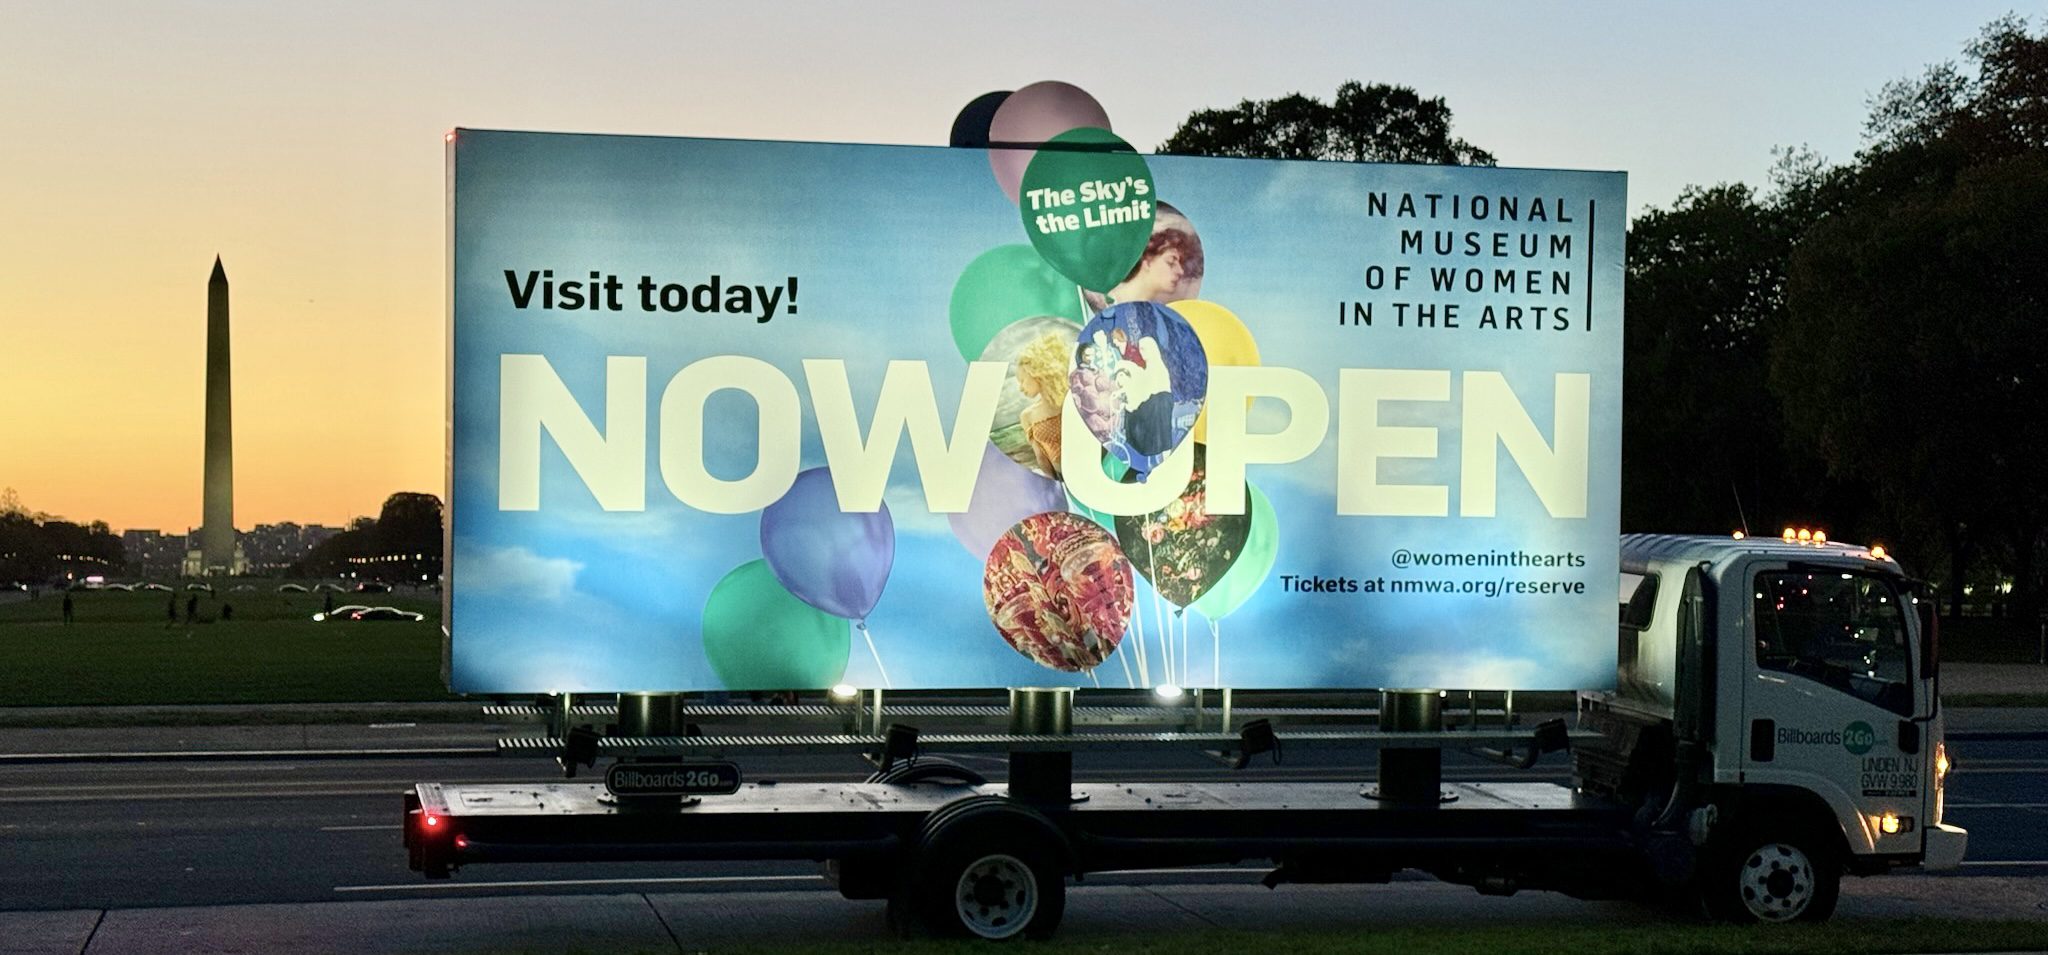 National Museum of Women in the Arts' Reopening Advertising Campaign mobile billboard